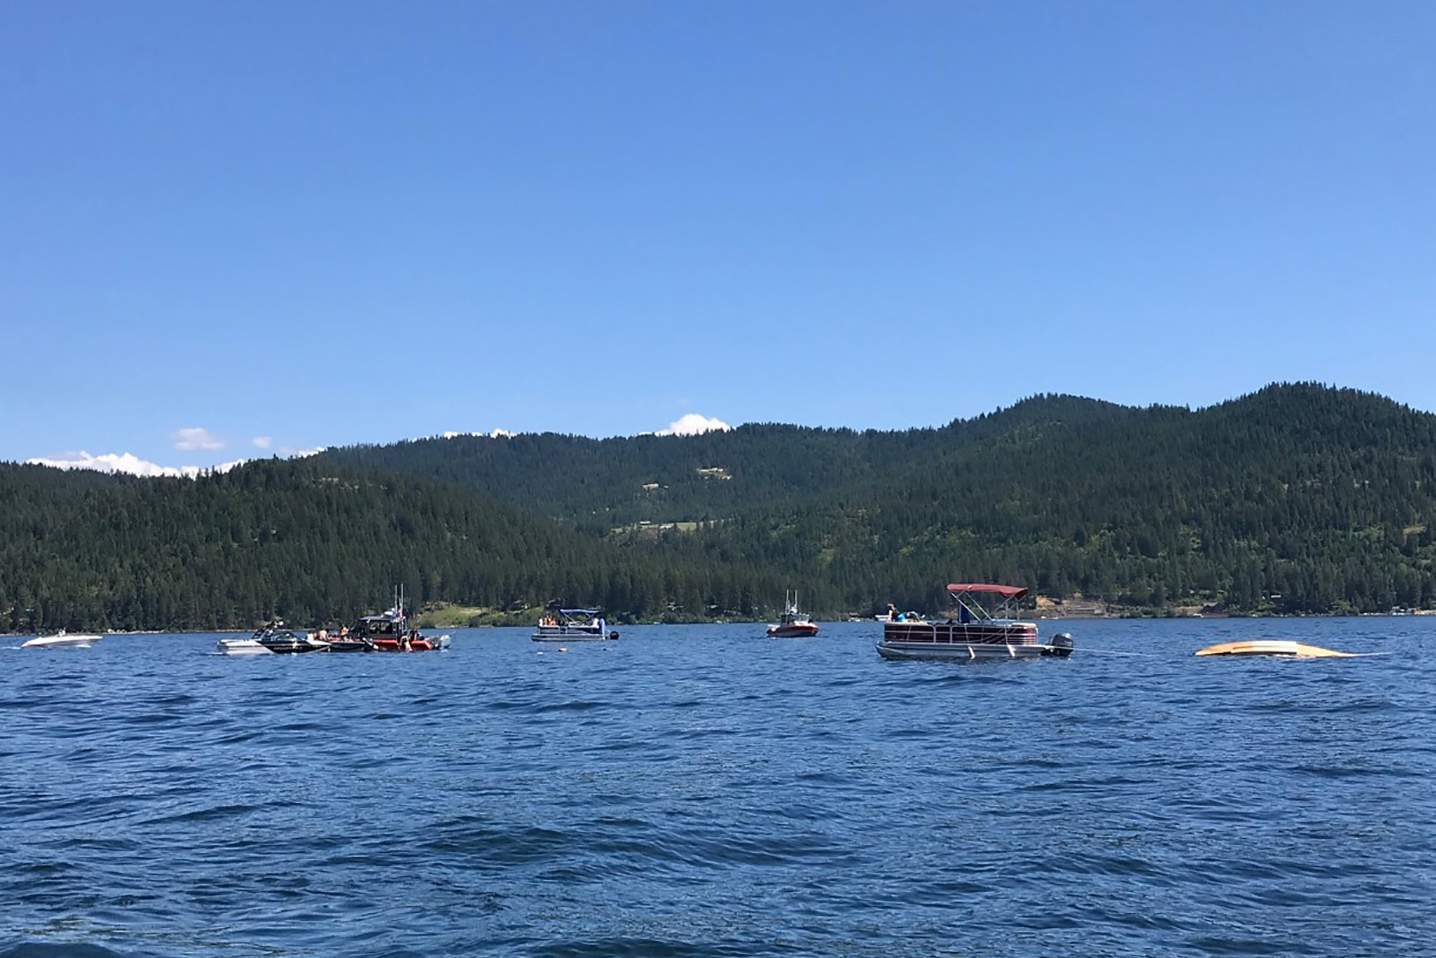 Sheriff: At least 8 killed in plane collision at Idaho lake